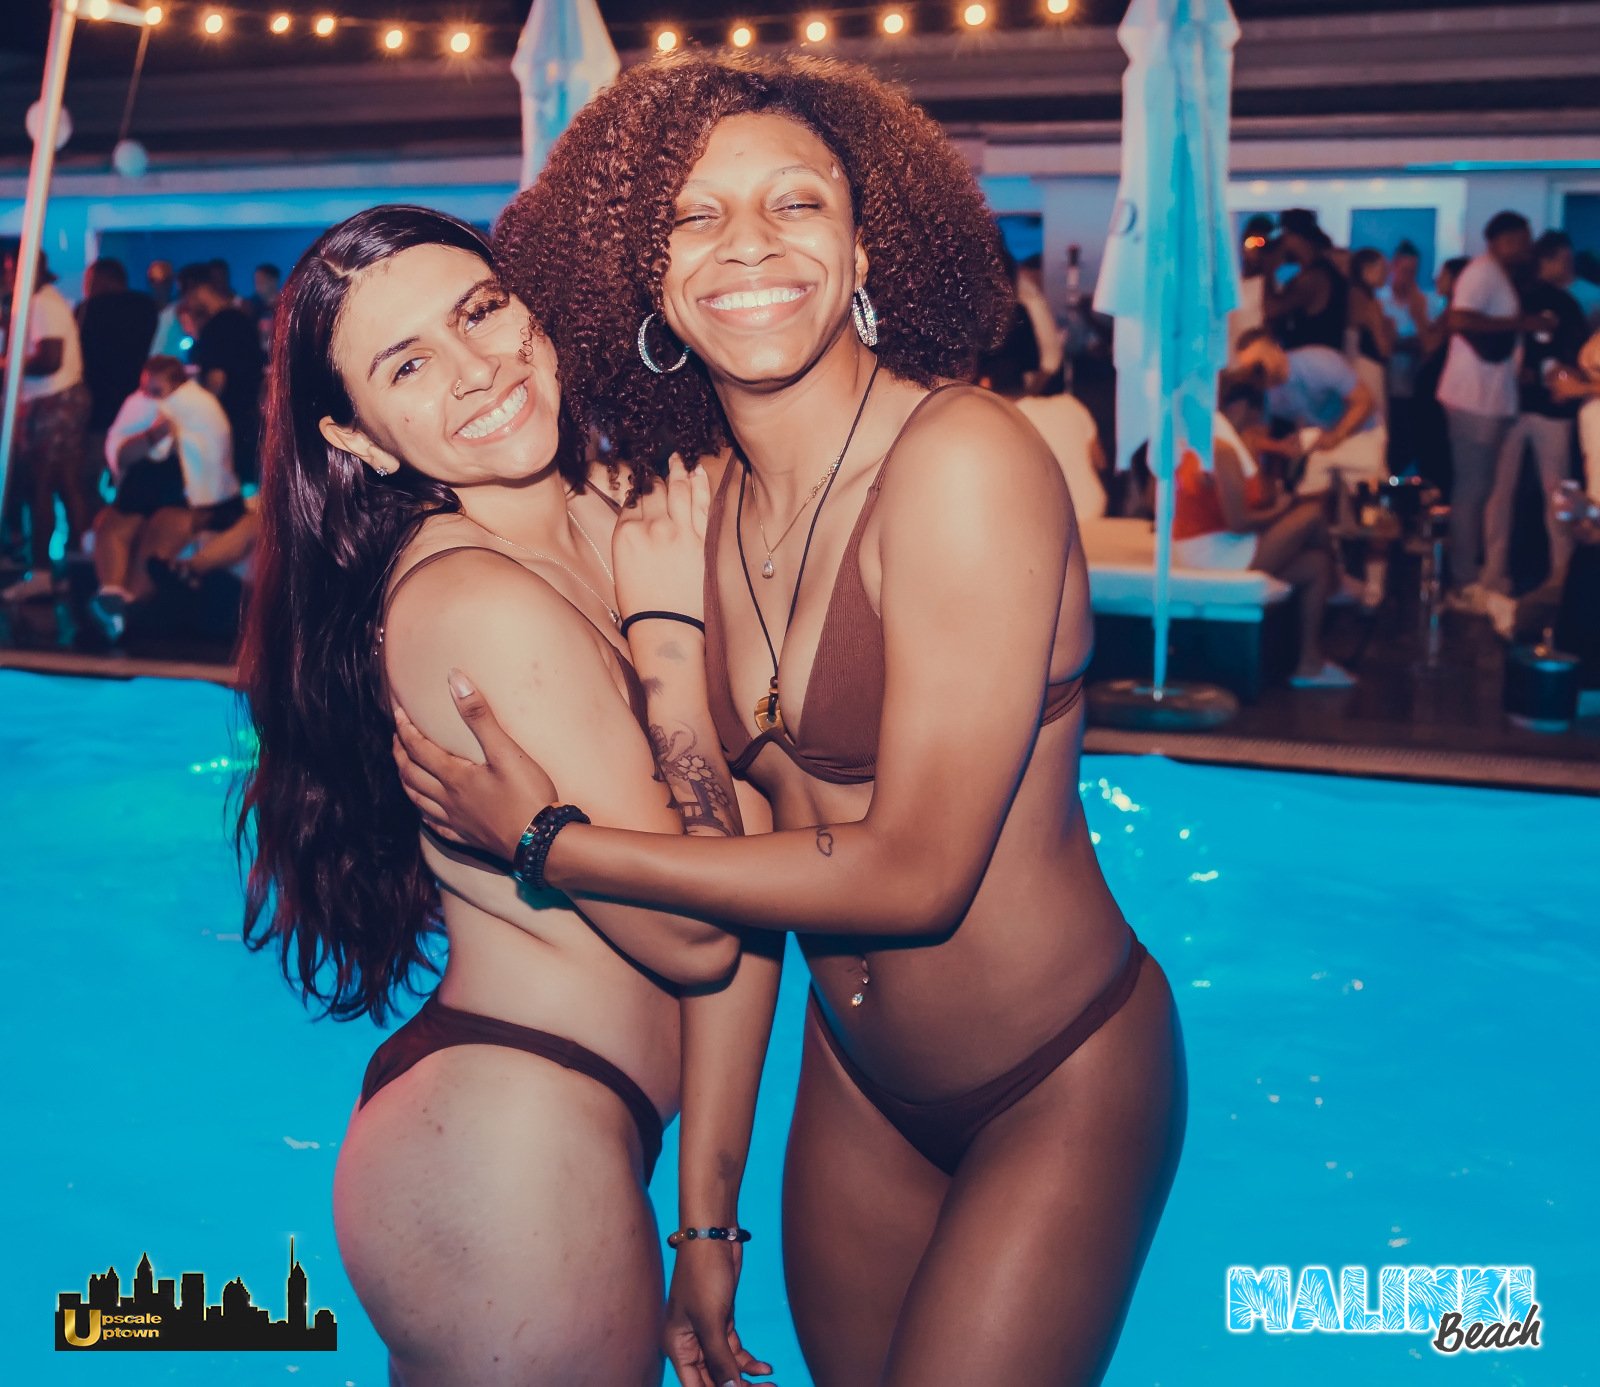 Pool Party - Upscale Uptown